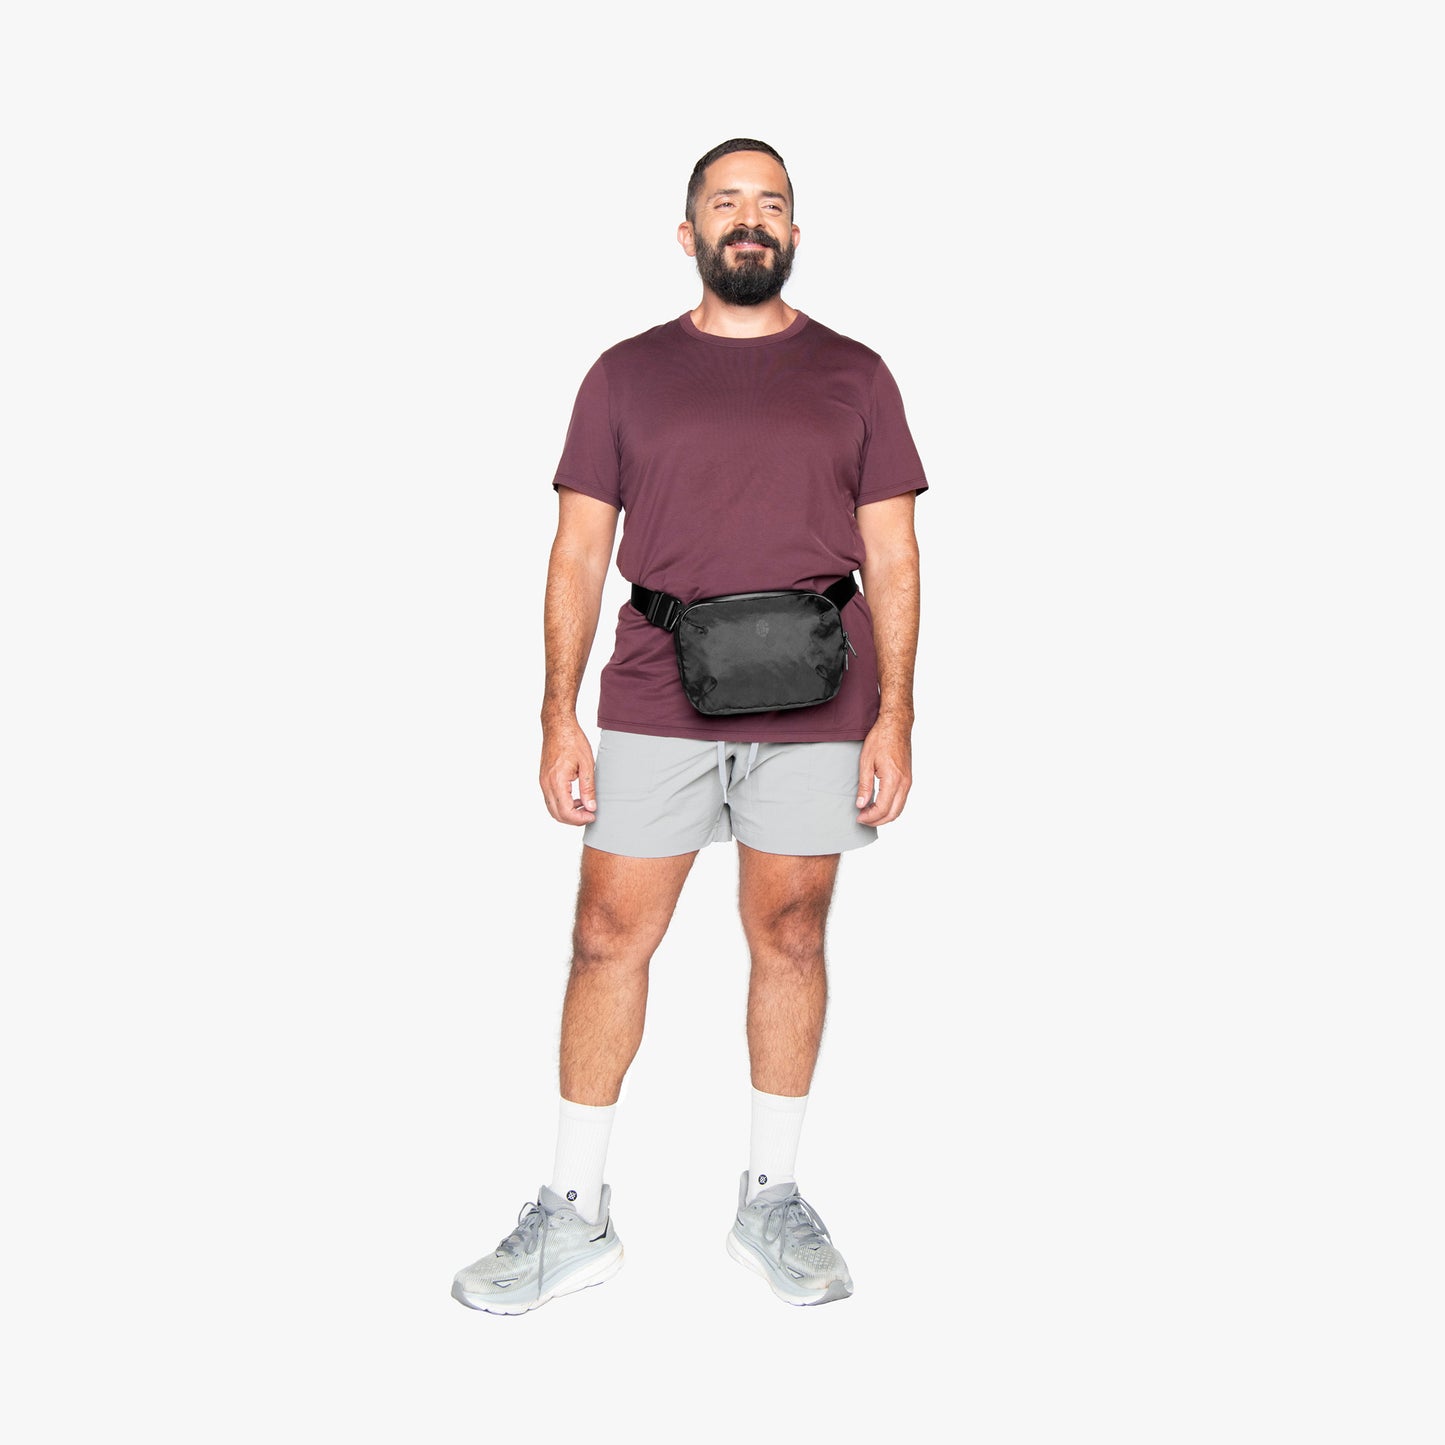 Worn as a fanny pack on Alejandro (5'9")